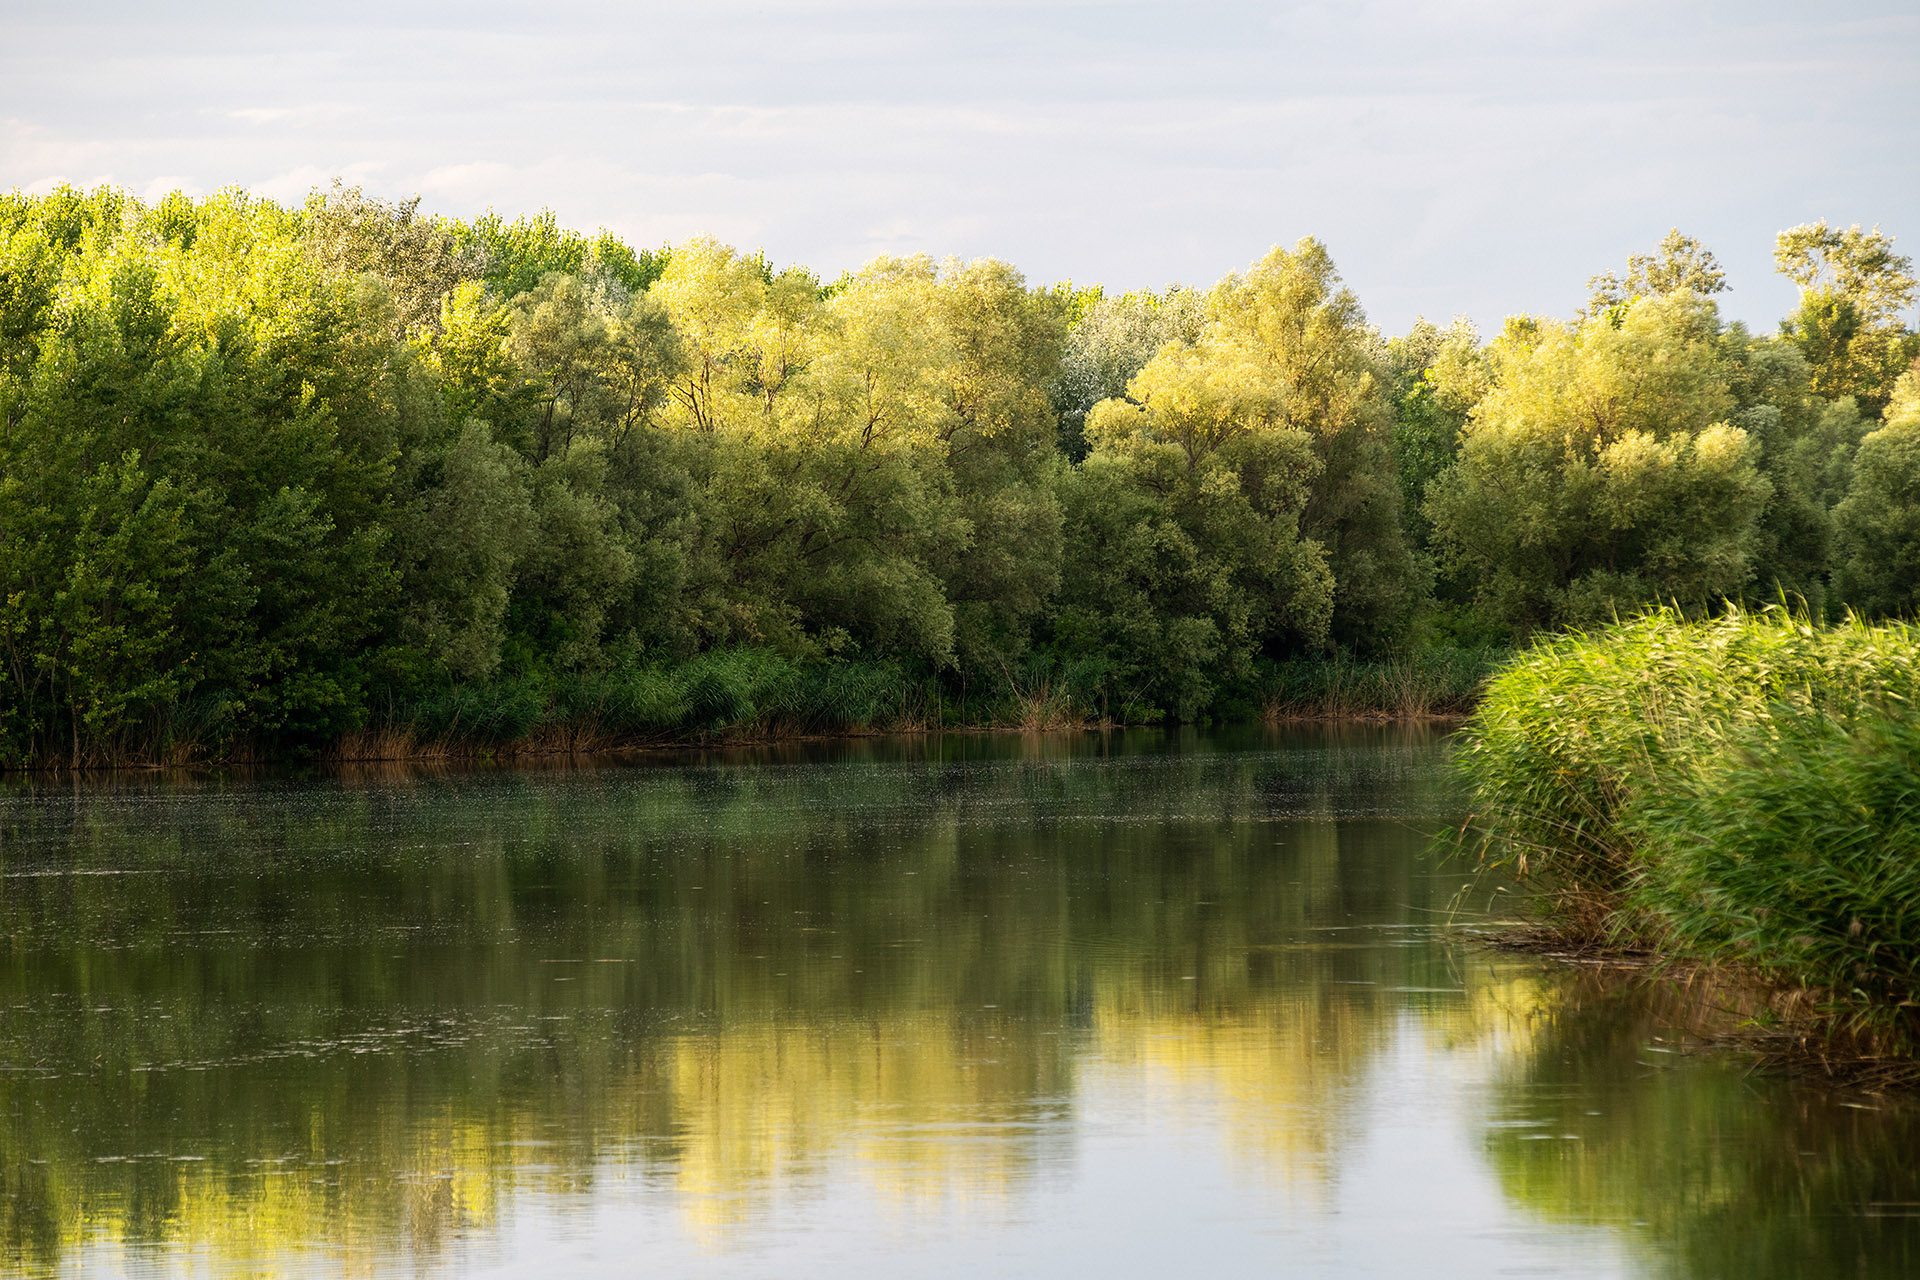 Connecting sewers to protect the wildlife of the Upper Tisza region